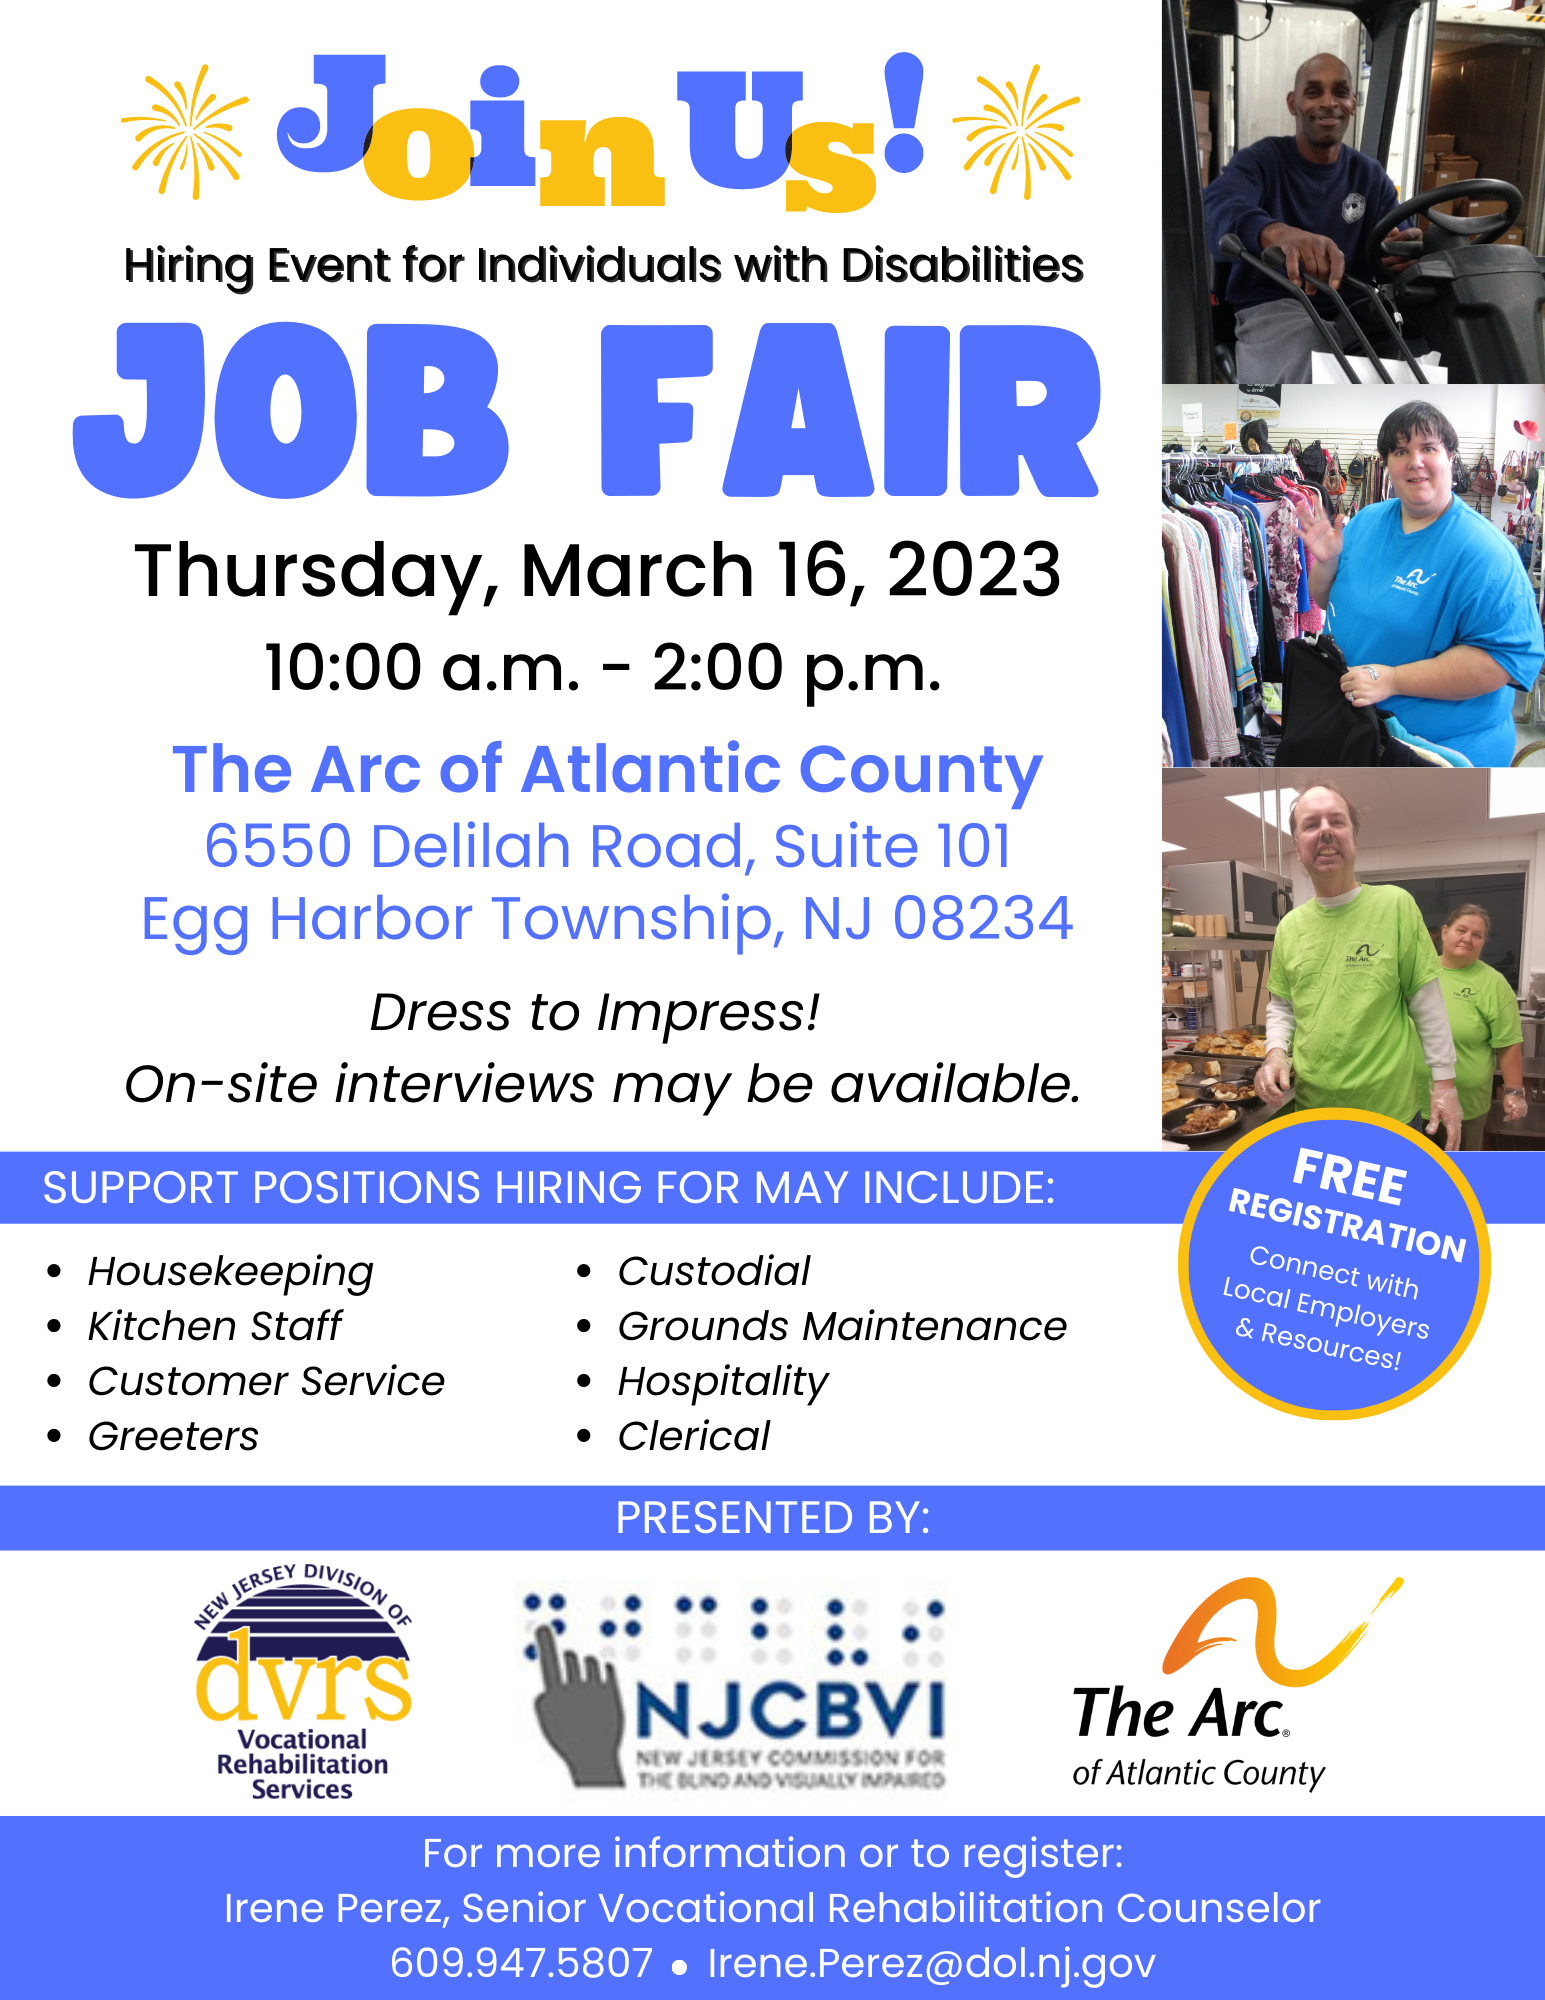 The Arc to hold a job fair for individuals living with disabilities